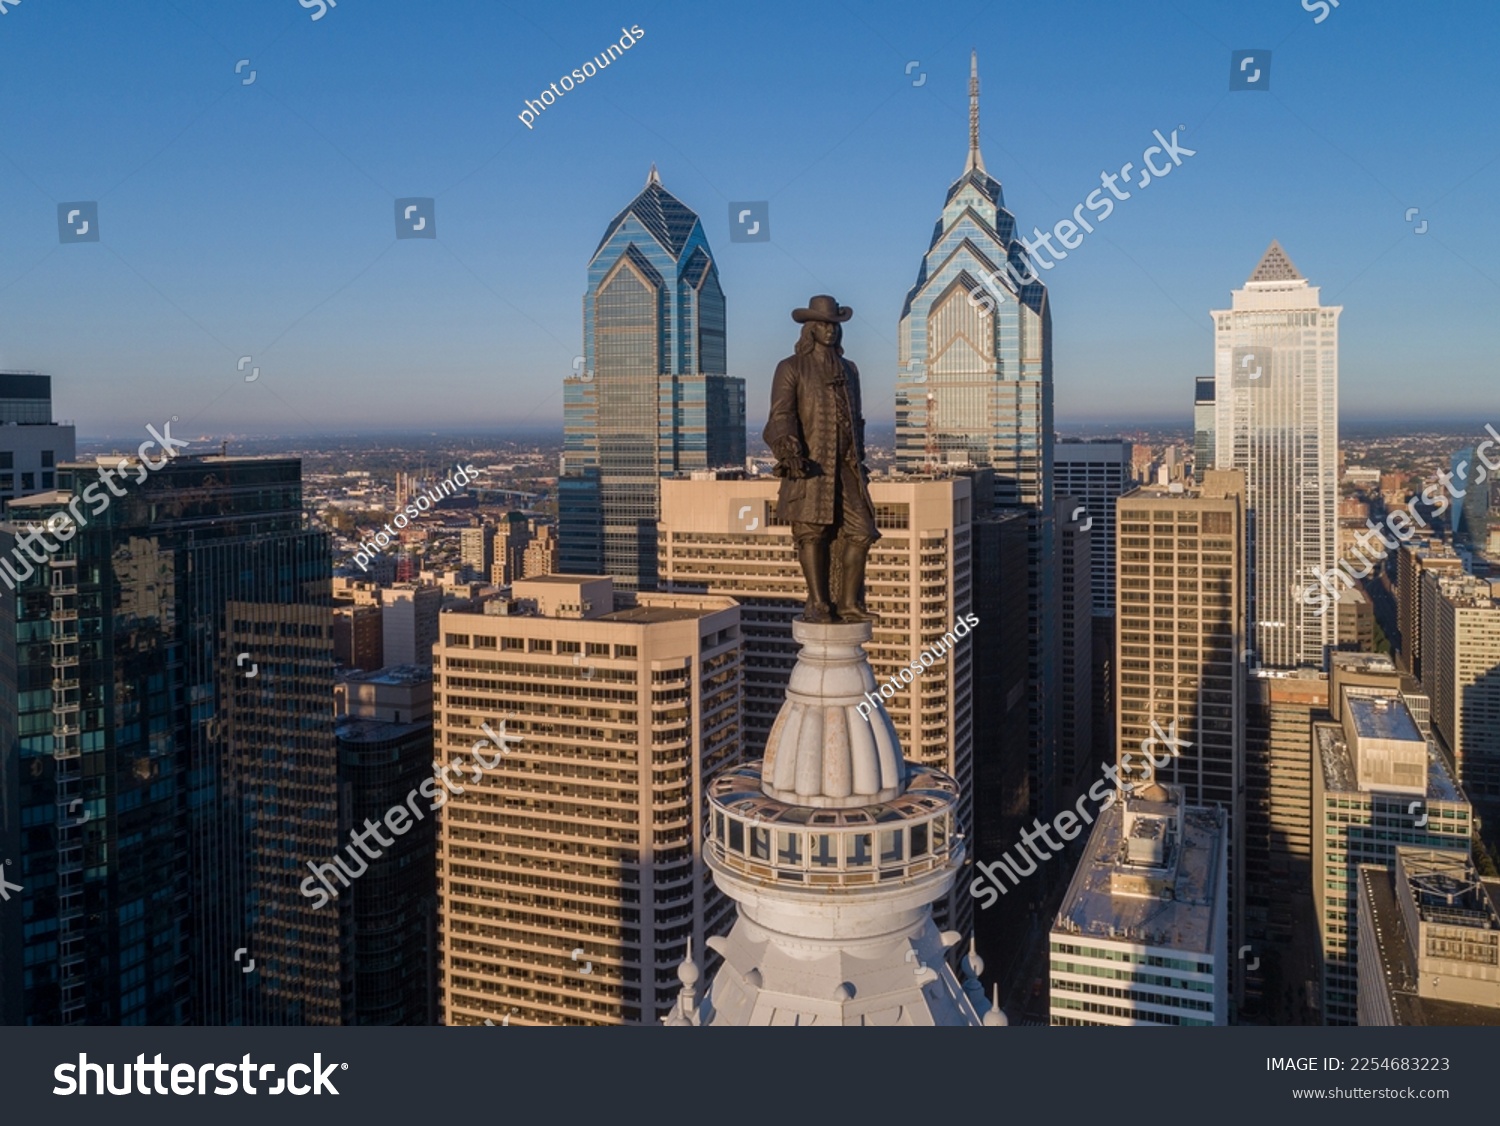 Statue of William Penn. Philadelphia City Hall. William Penn is a bronze statue by Alexander Milne Calder of William Penn. It is located atop the Philadelphia City Hall in Philadelphia, Pennsylvania. #2254683223